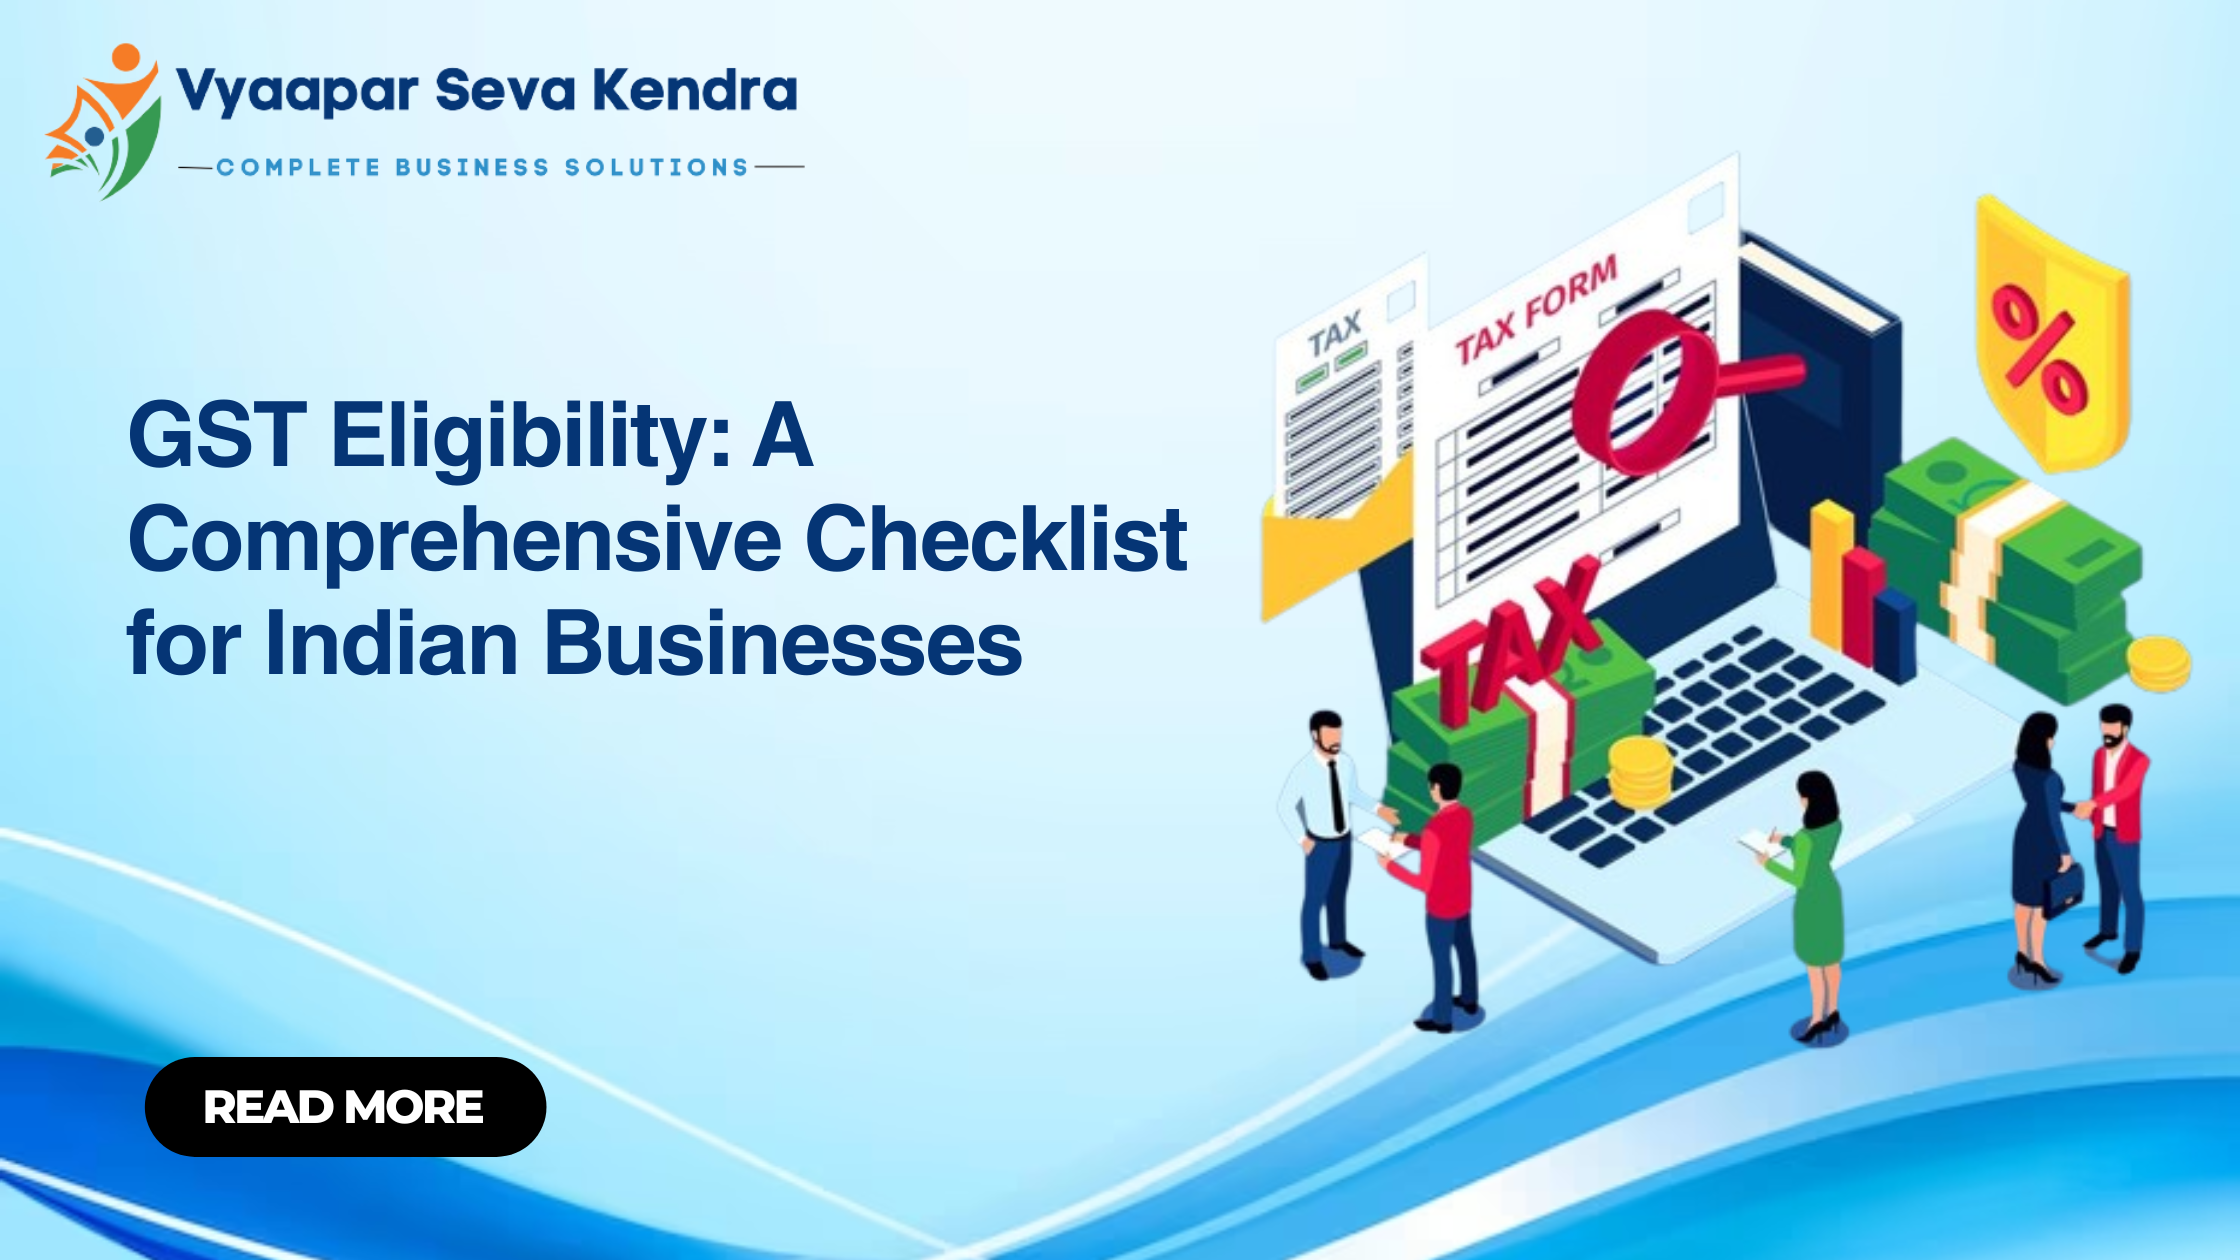 GST Eligibility: A Comprehensive Checklist for Indian Businesses